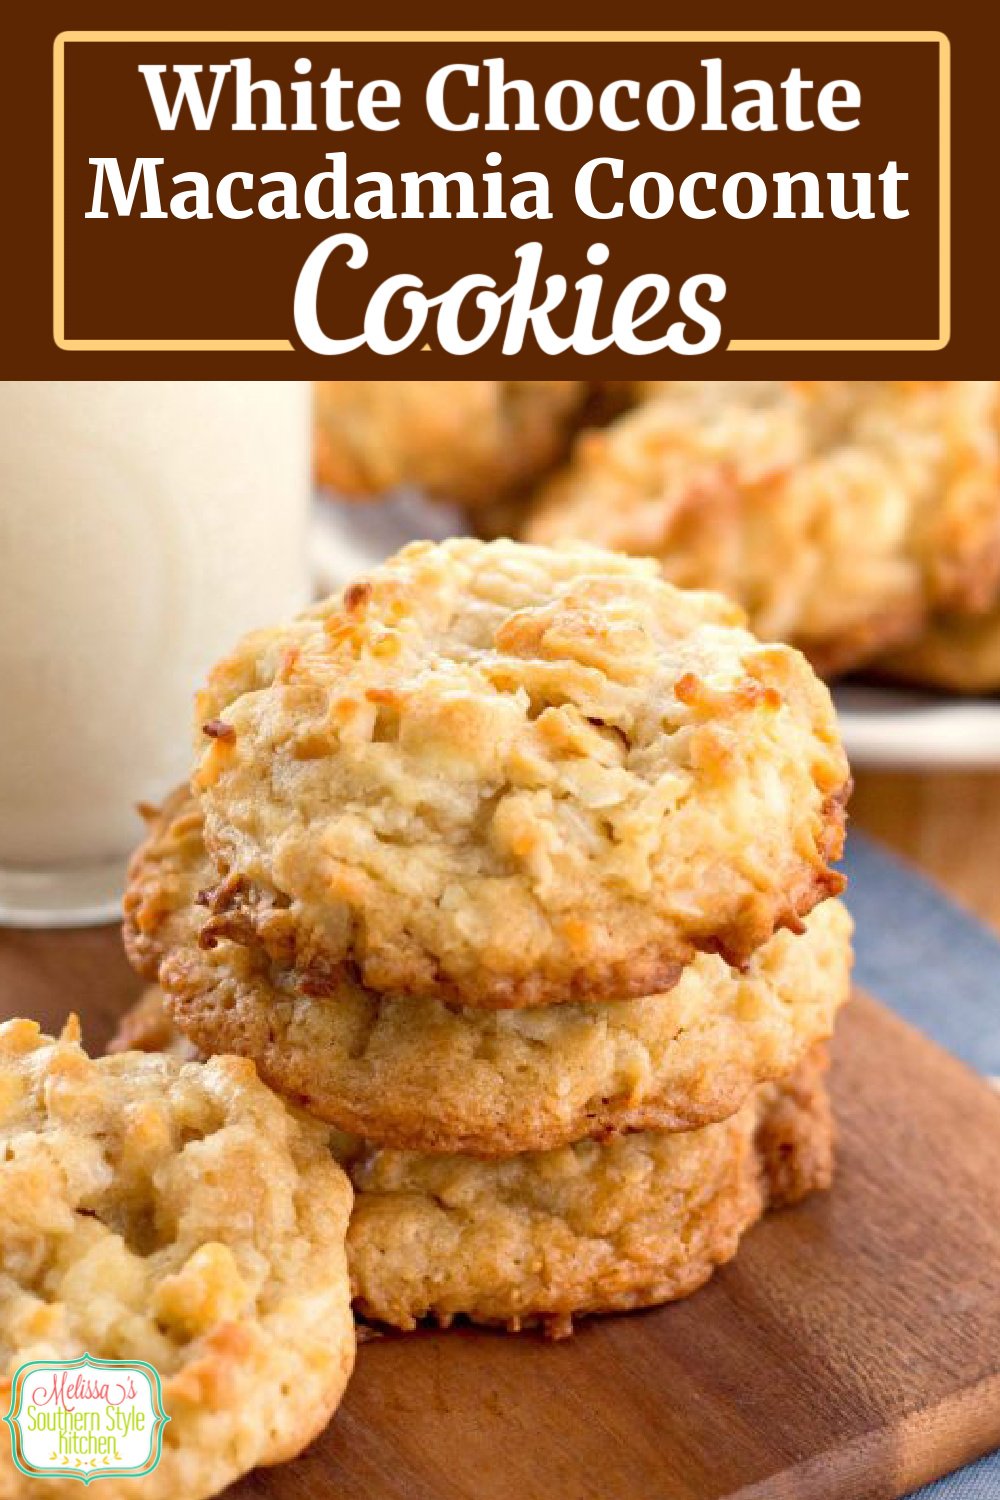 These loaded White Chocolate Macadamia Coconut Cookies won't last long in your cookie jar #whitechocolatechipcookies #coconutcookies #macadamianuts #christmascookies #cookierecipes #coconut #desserts #dessertfoodrecipes #chocolatechipcookies #cookies #holidaybaking #bestcookierecipes #southernfood #southernrecipes via @melissasssk